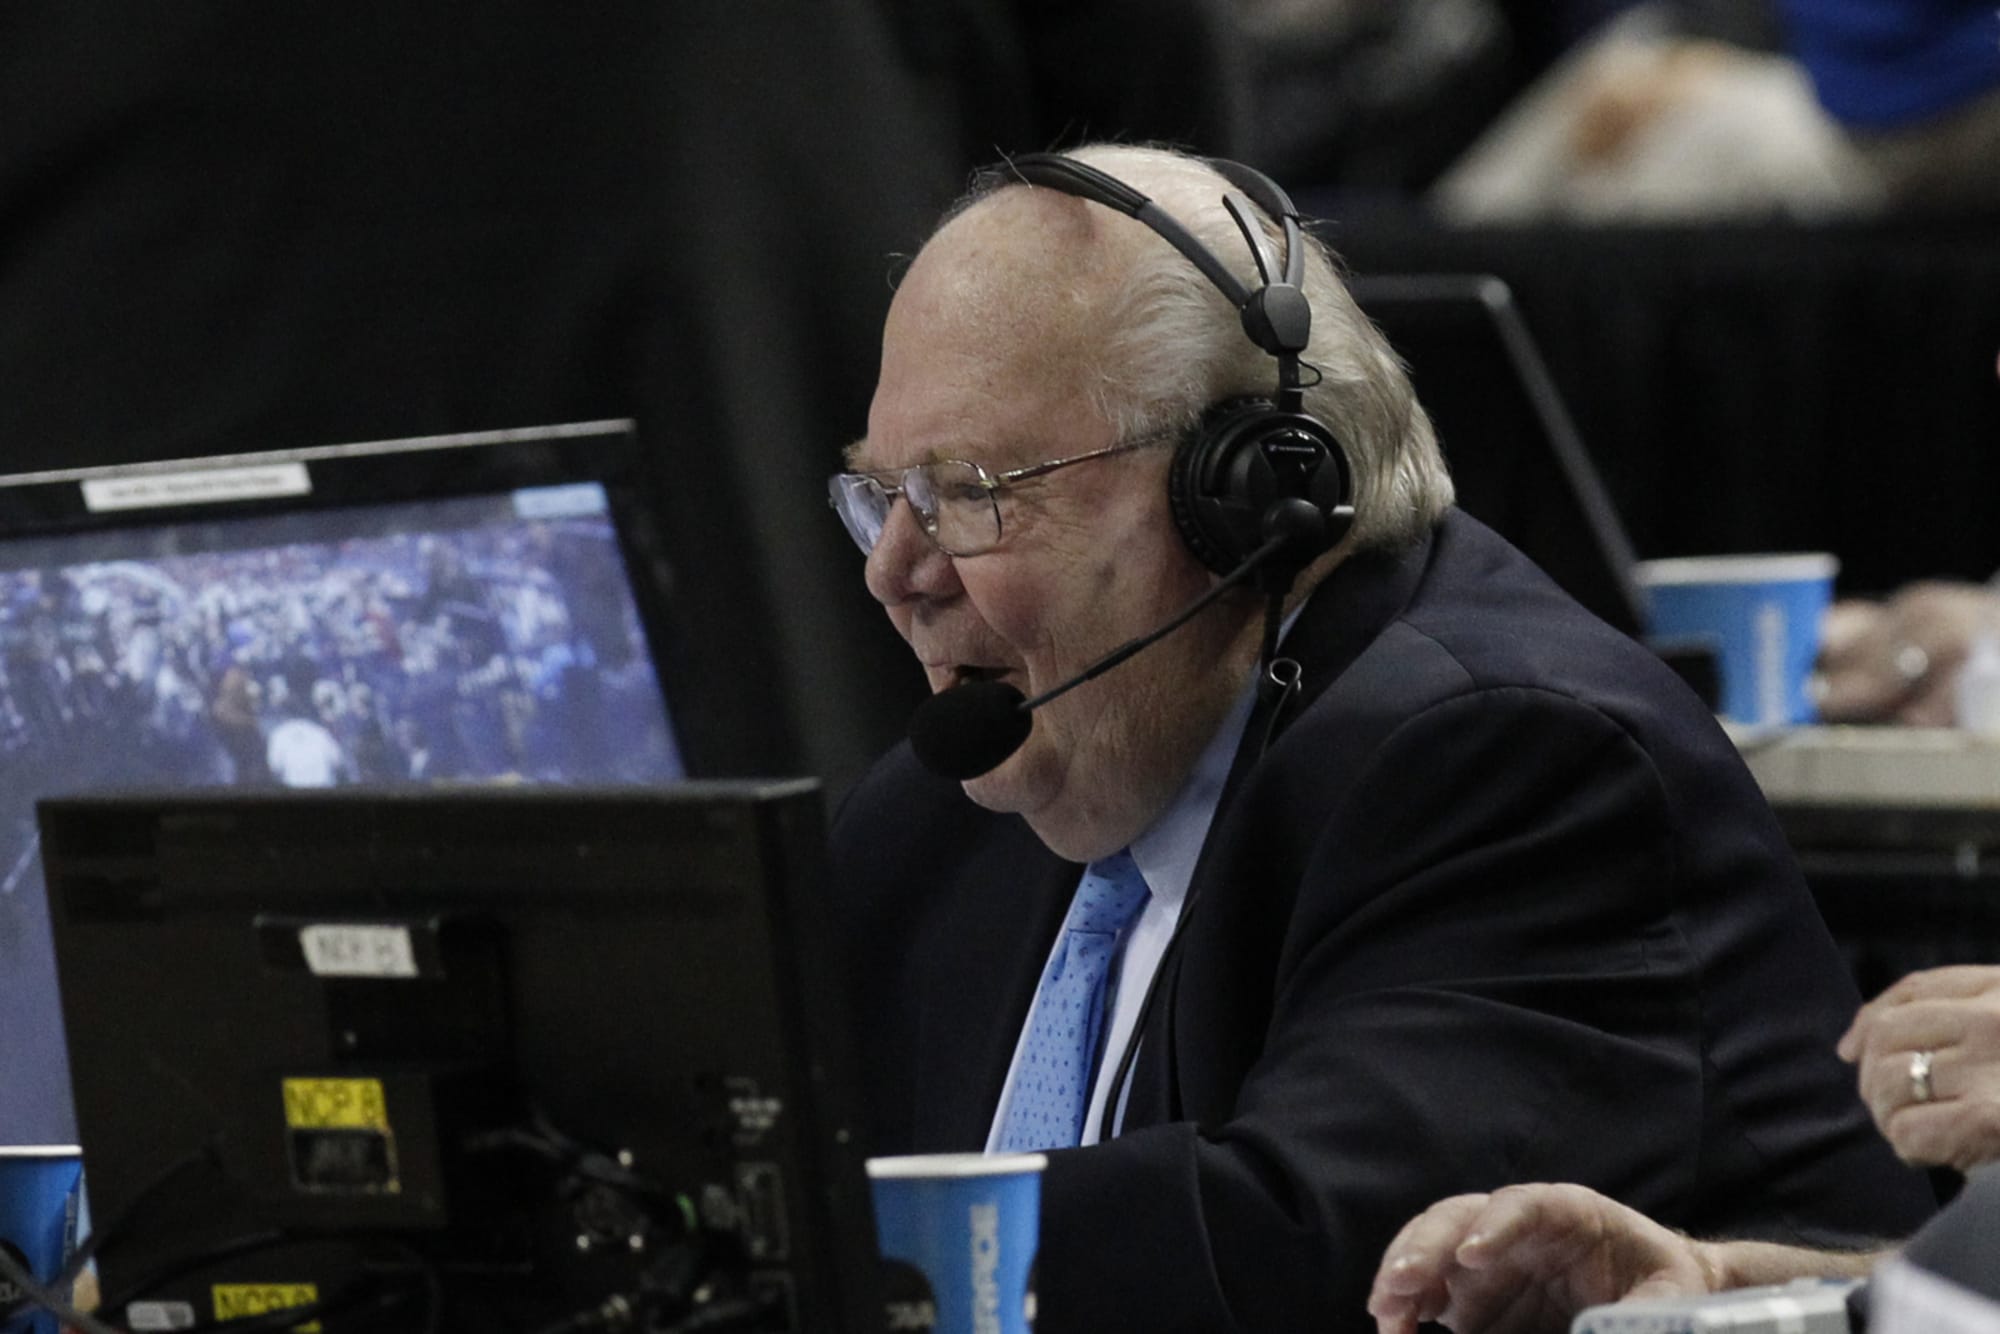 Verne Lundquist’s appearance in SEC Championship pregame has fans getting emotional